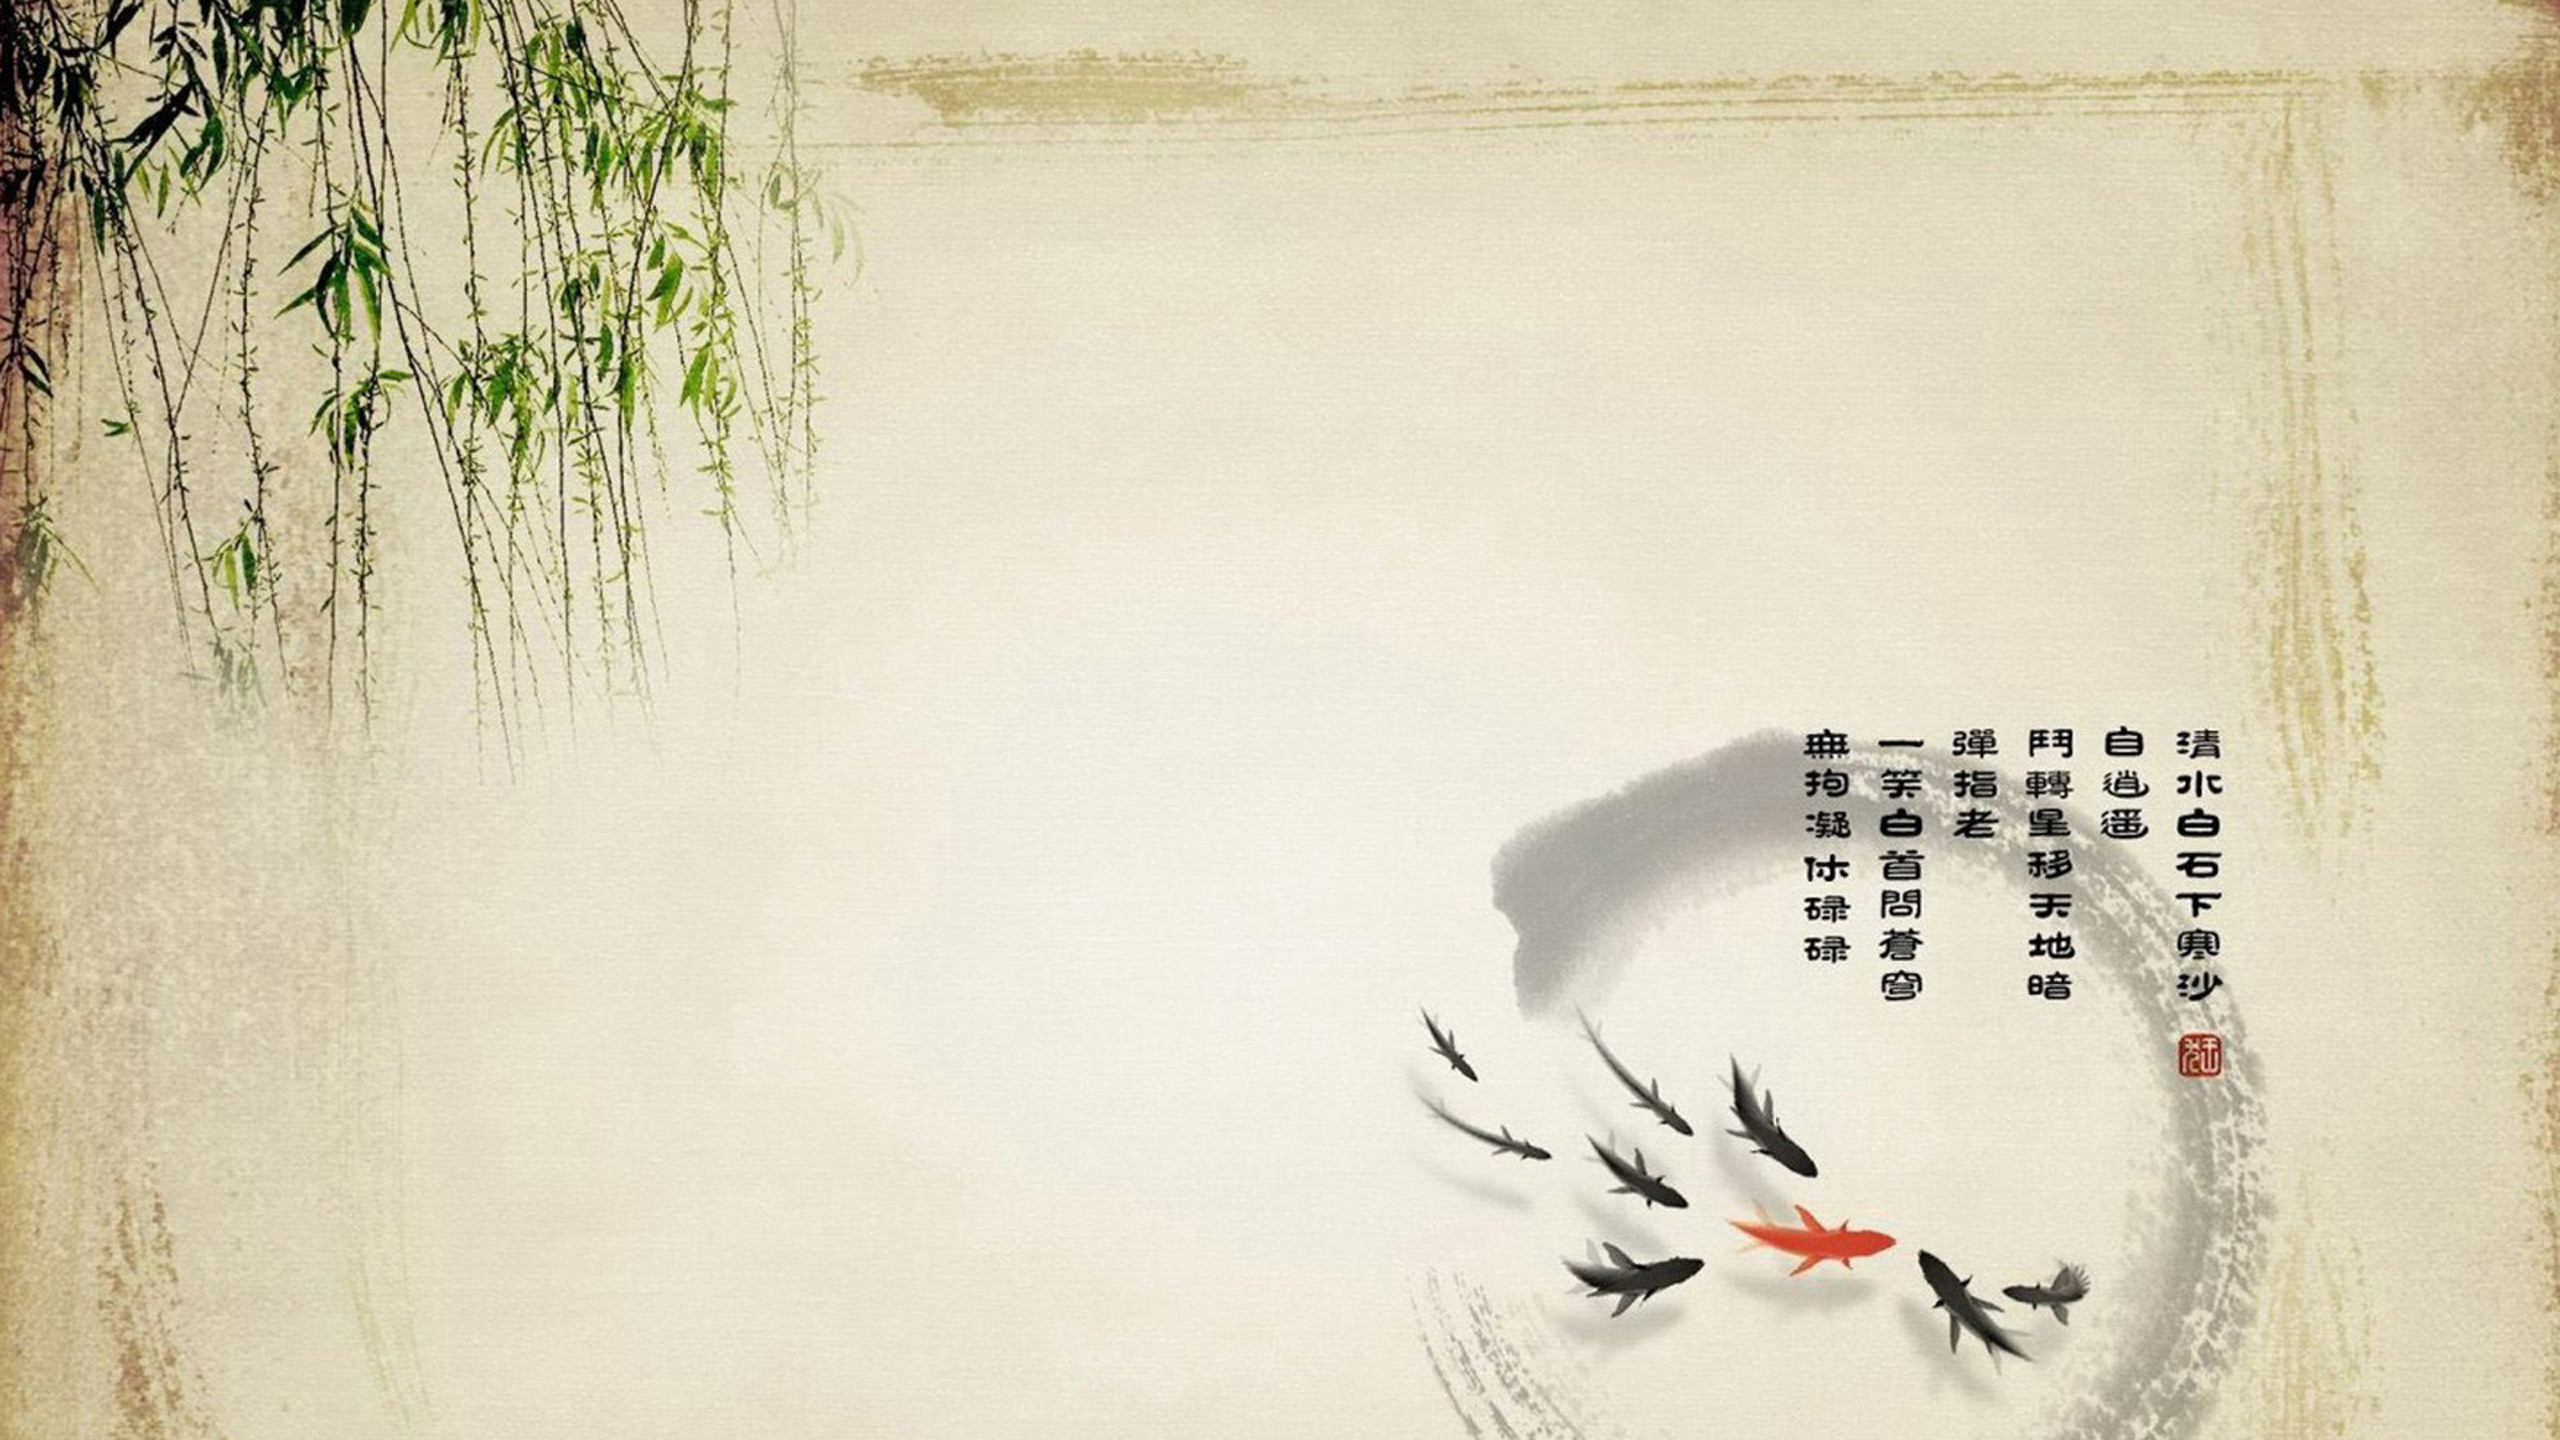 2560x1440 Chinese Wallpaper Designs Free Download.